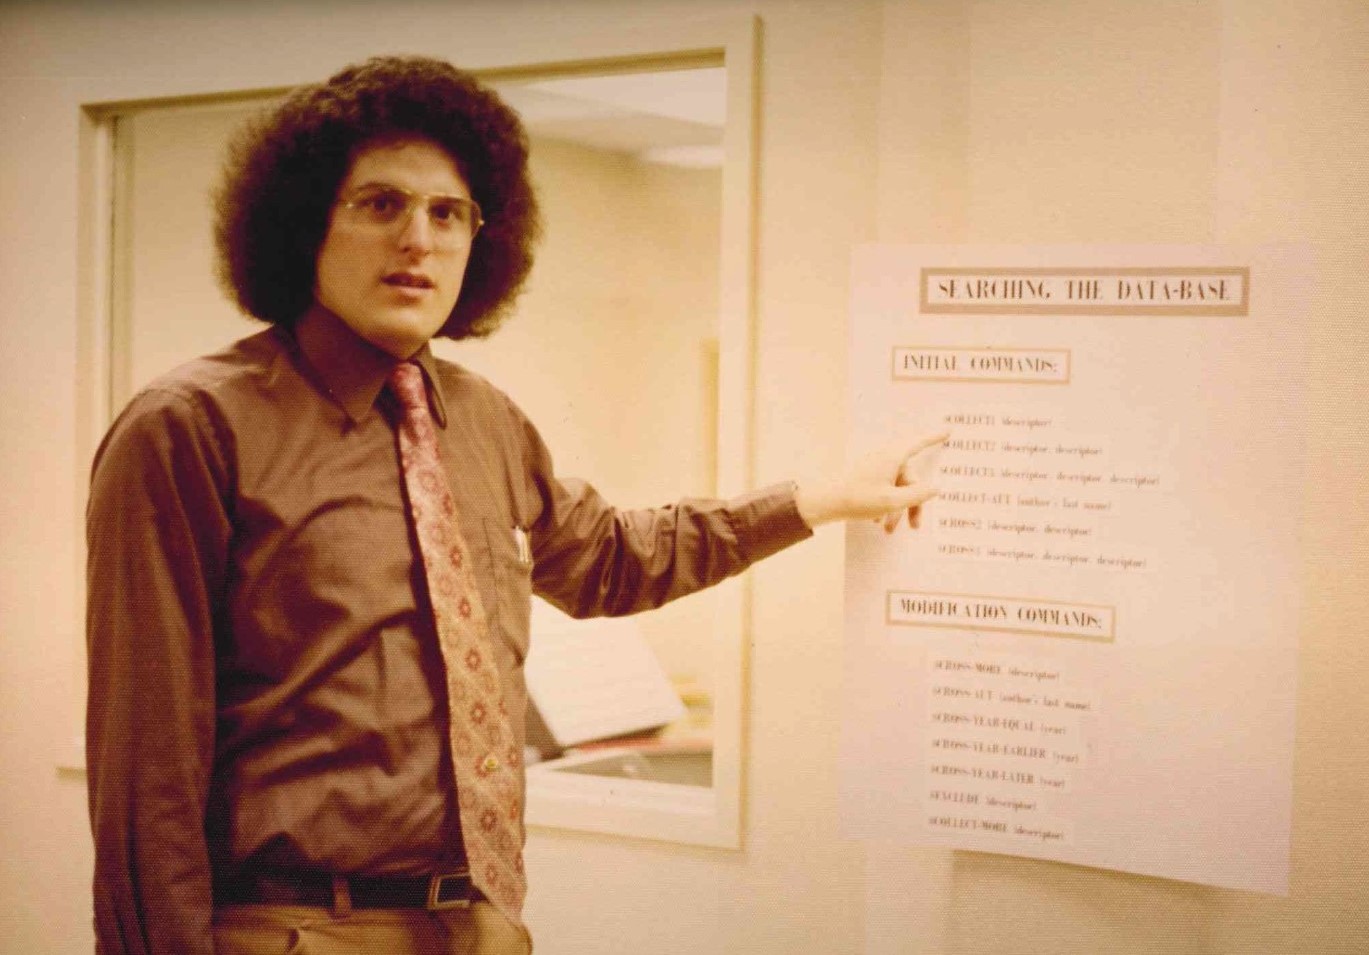 Library staff member gestures to a poster titled "Searching the Database" that lists database queries.